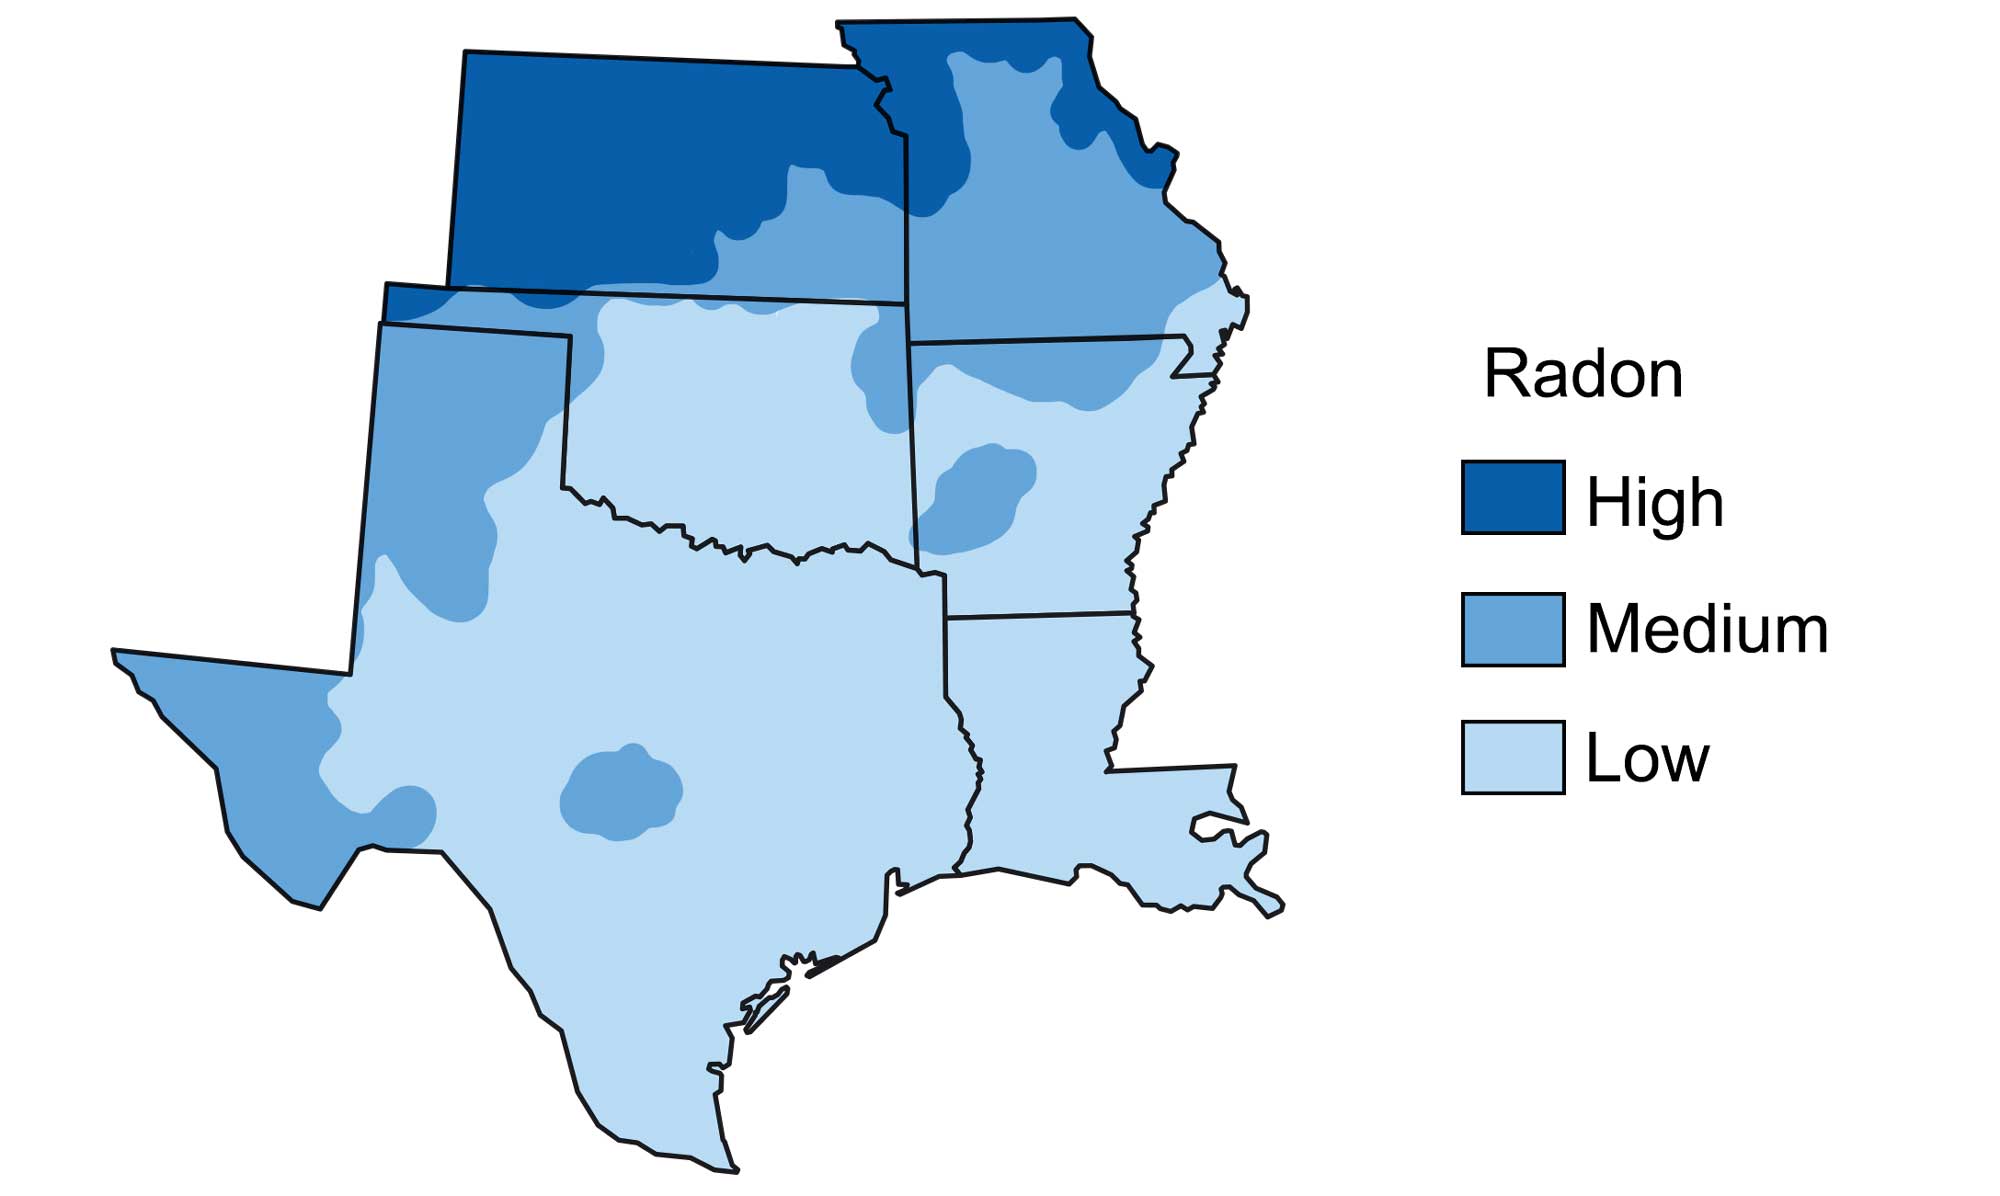 Map of the South Central United States showing radon levels across the region.